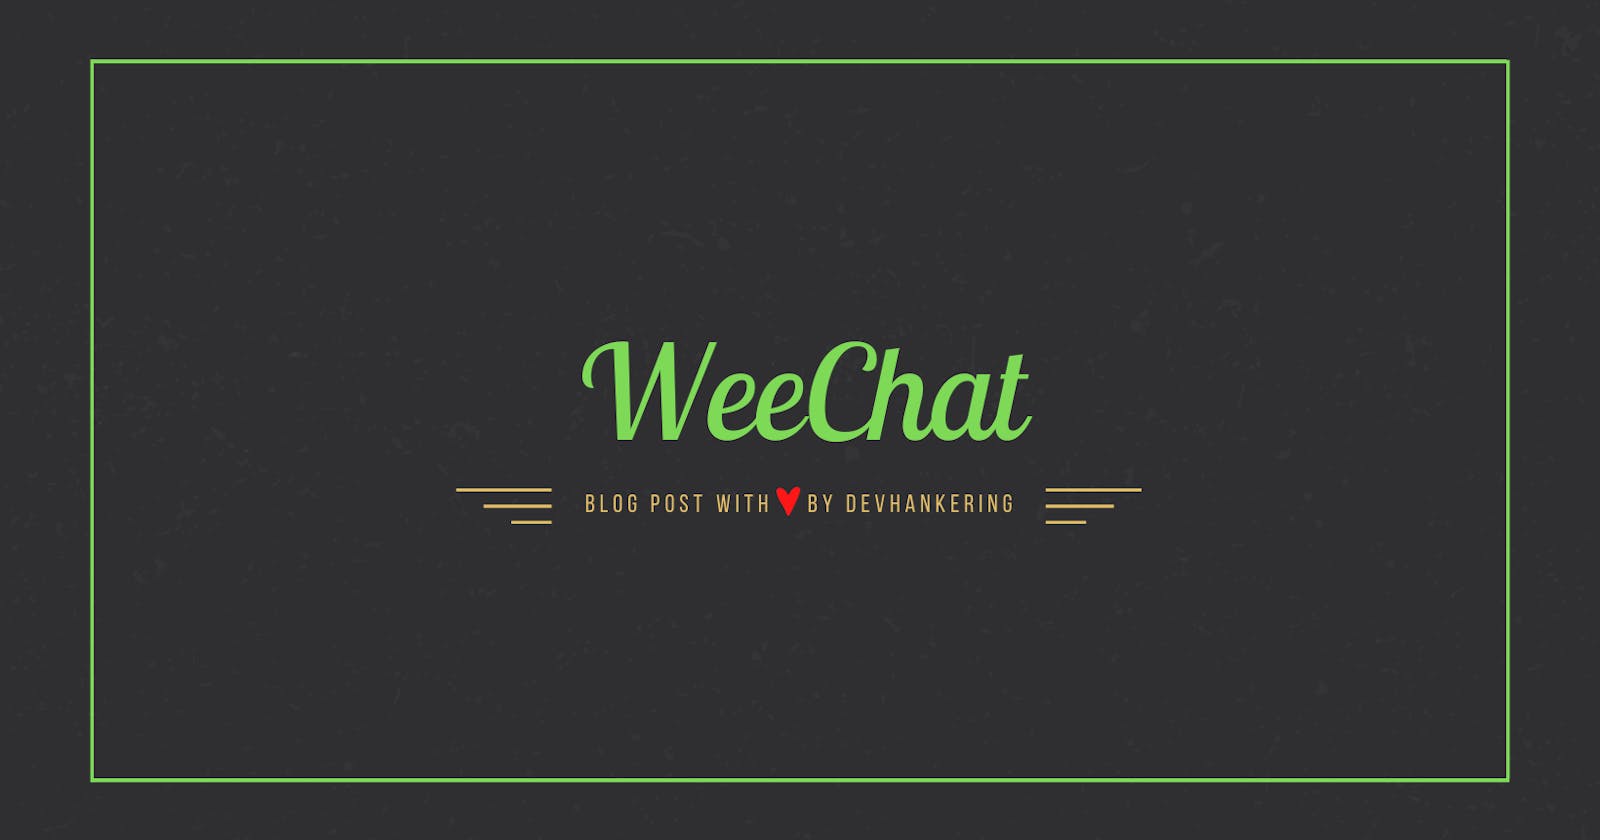 How To Use WeeChat